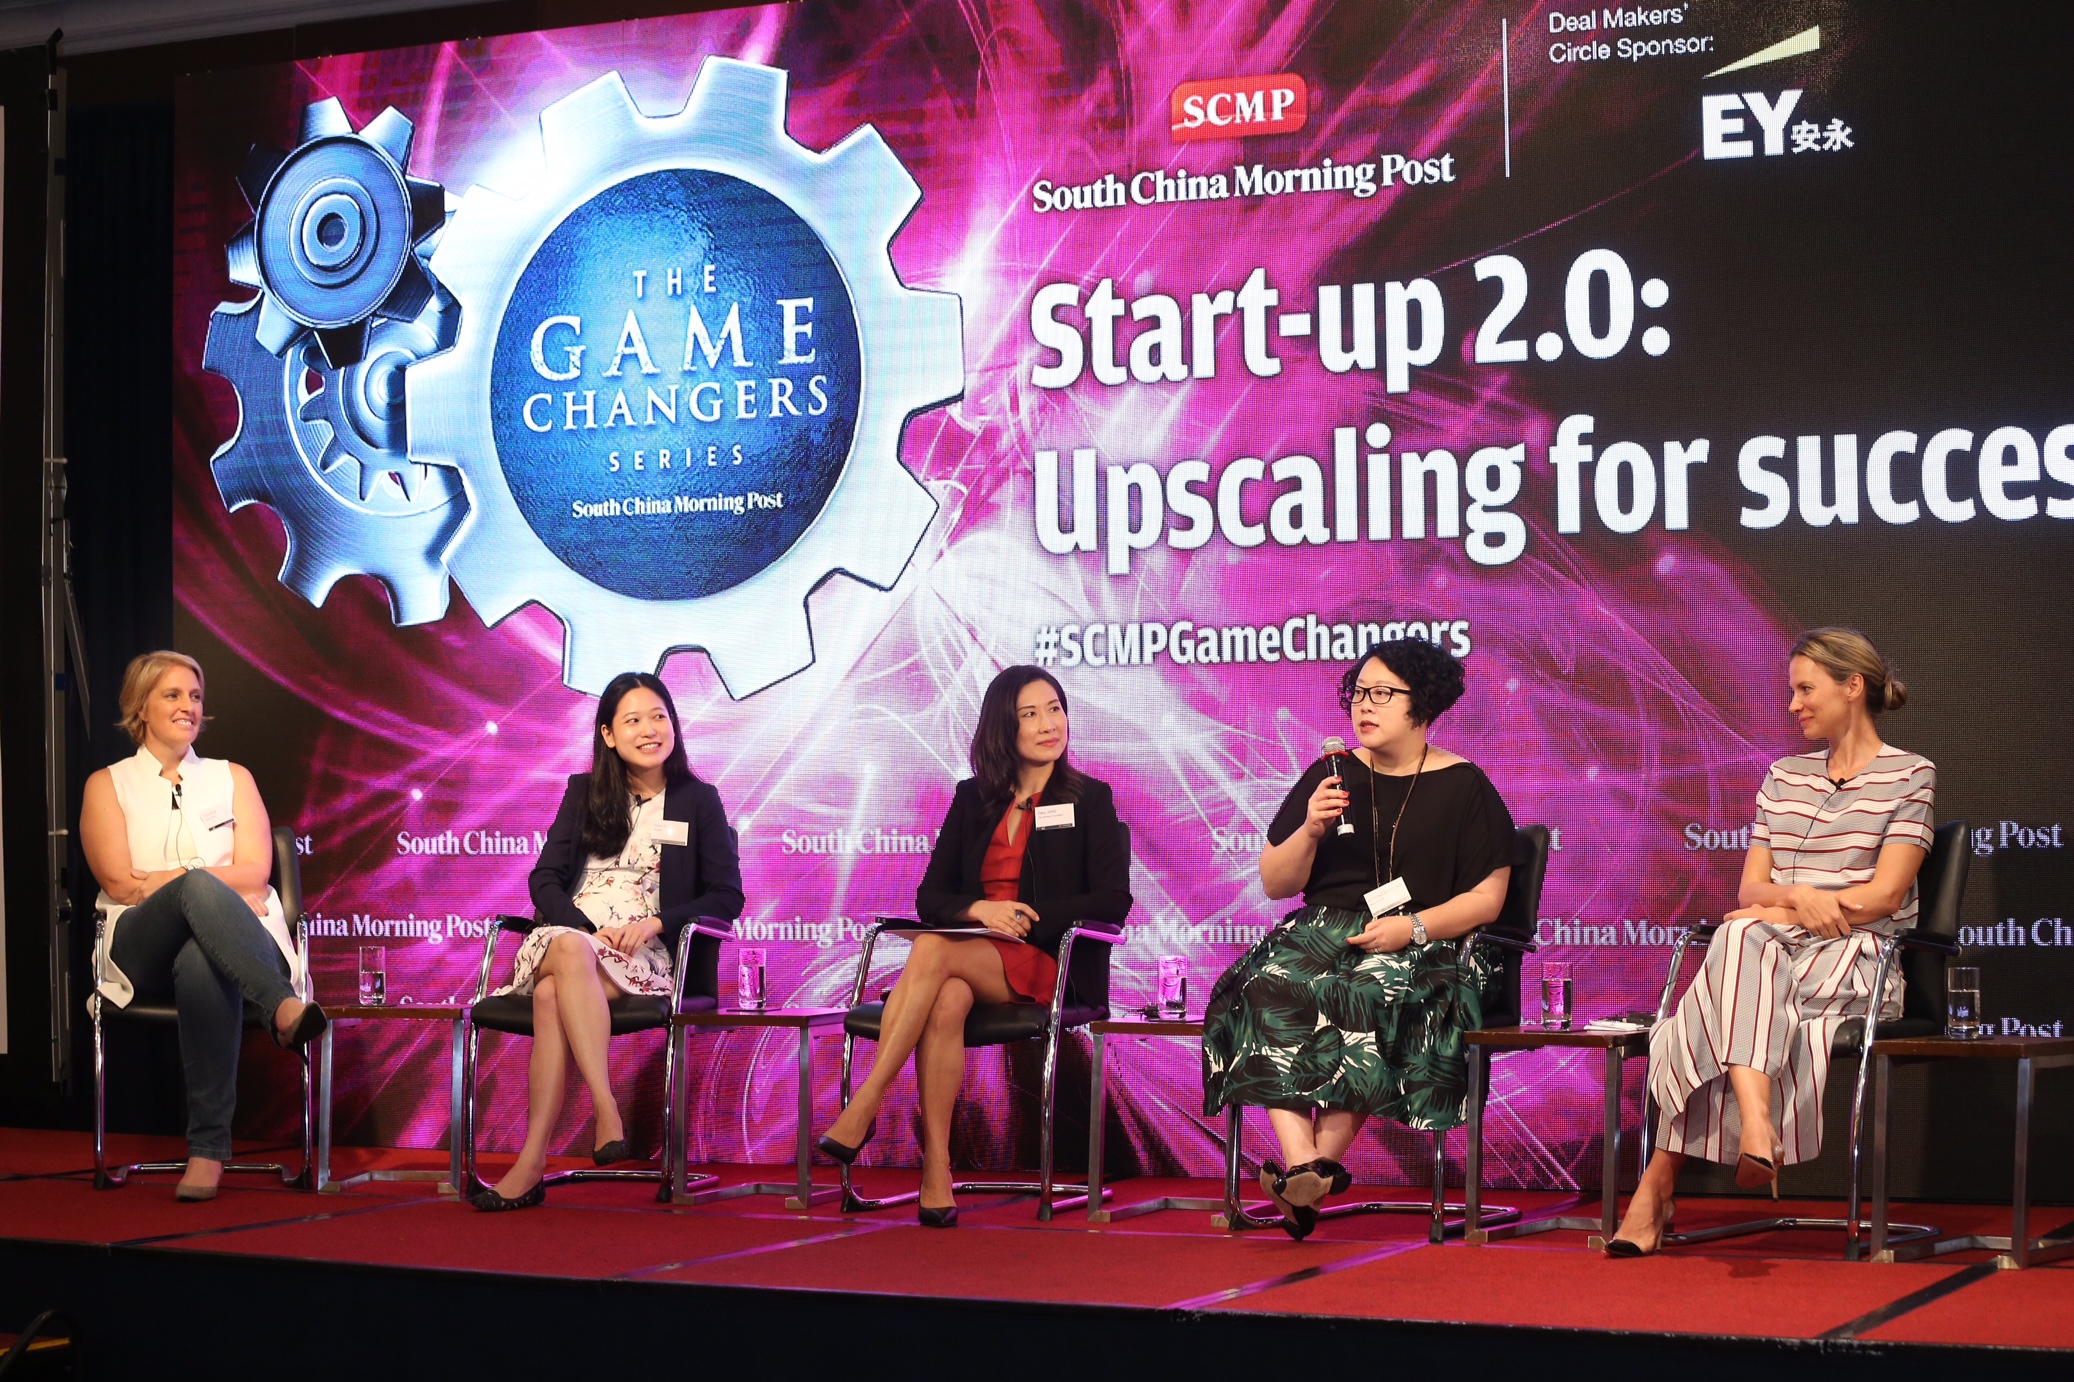 Cat Purvis of Exicon, Fiona Lau of Shopline, Women's Foundation advisor Daisy Jiang, Meatmarket's Ivy Wong Stephens, and Jane Gottschalk of Jax Coco speak at the SCMP Game Changers Forum. Photo: Cheng Kok-yin